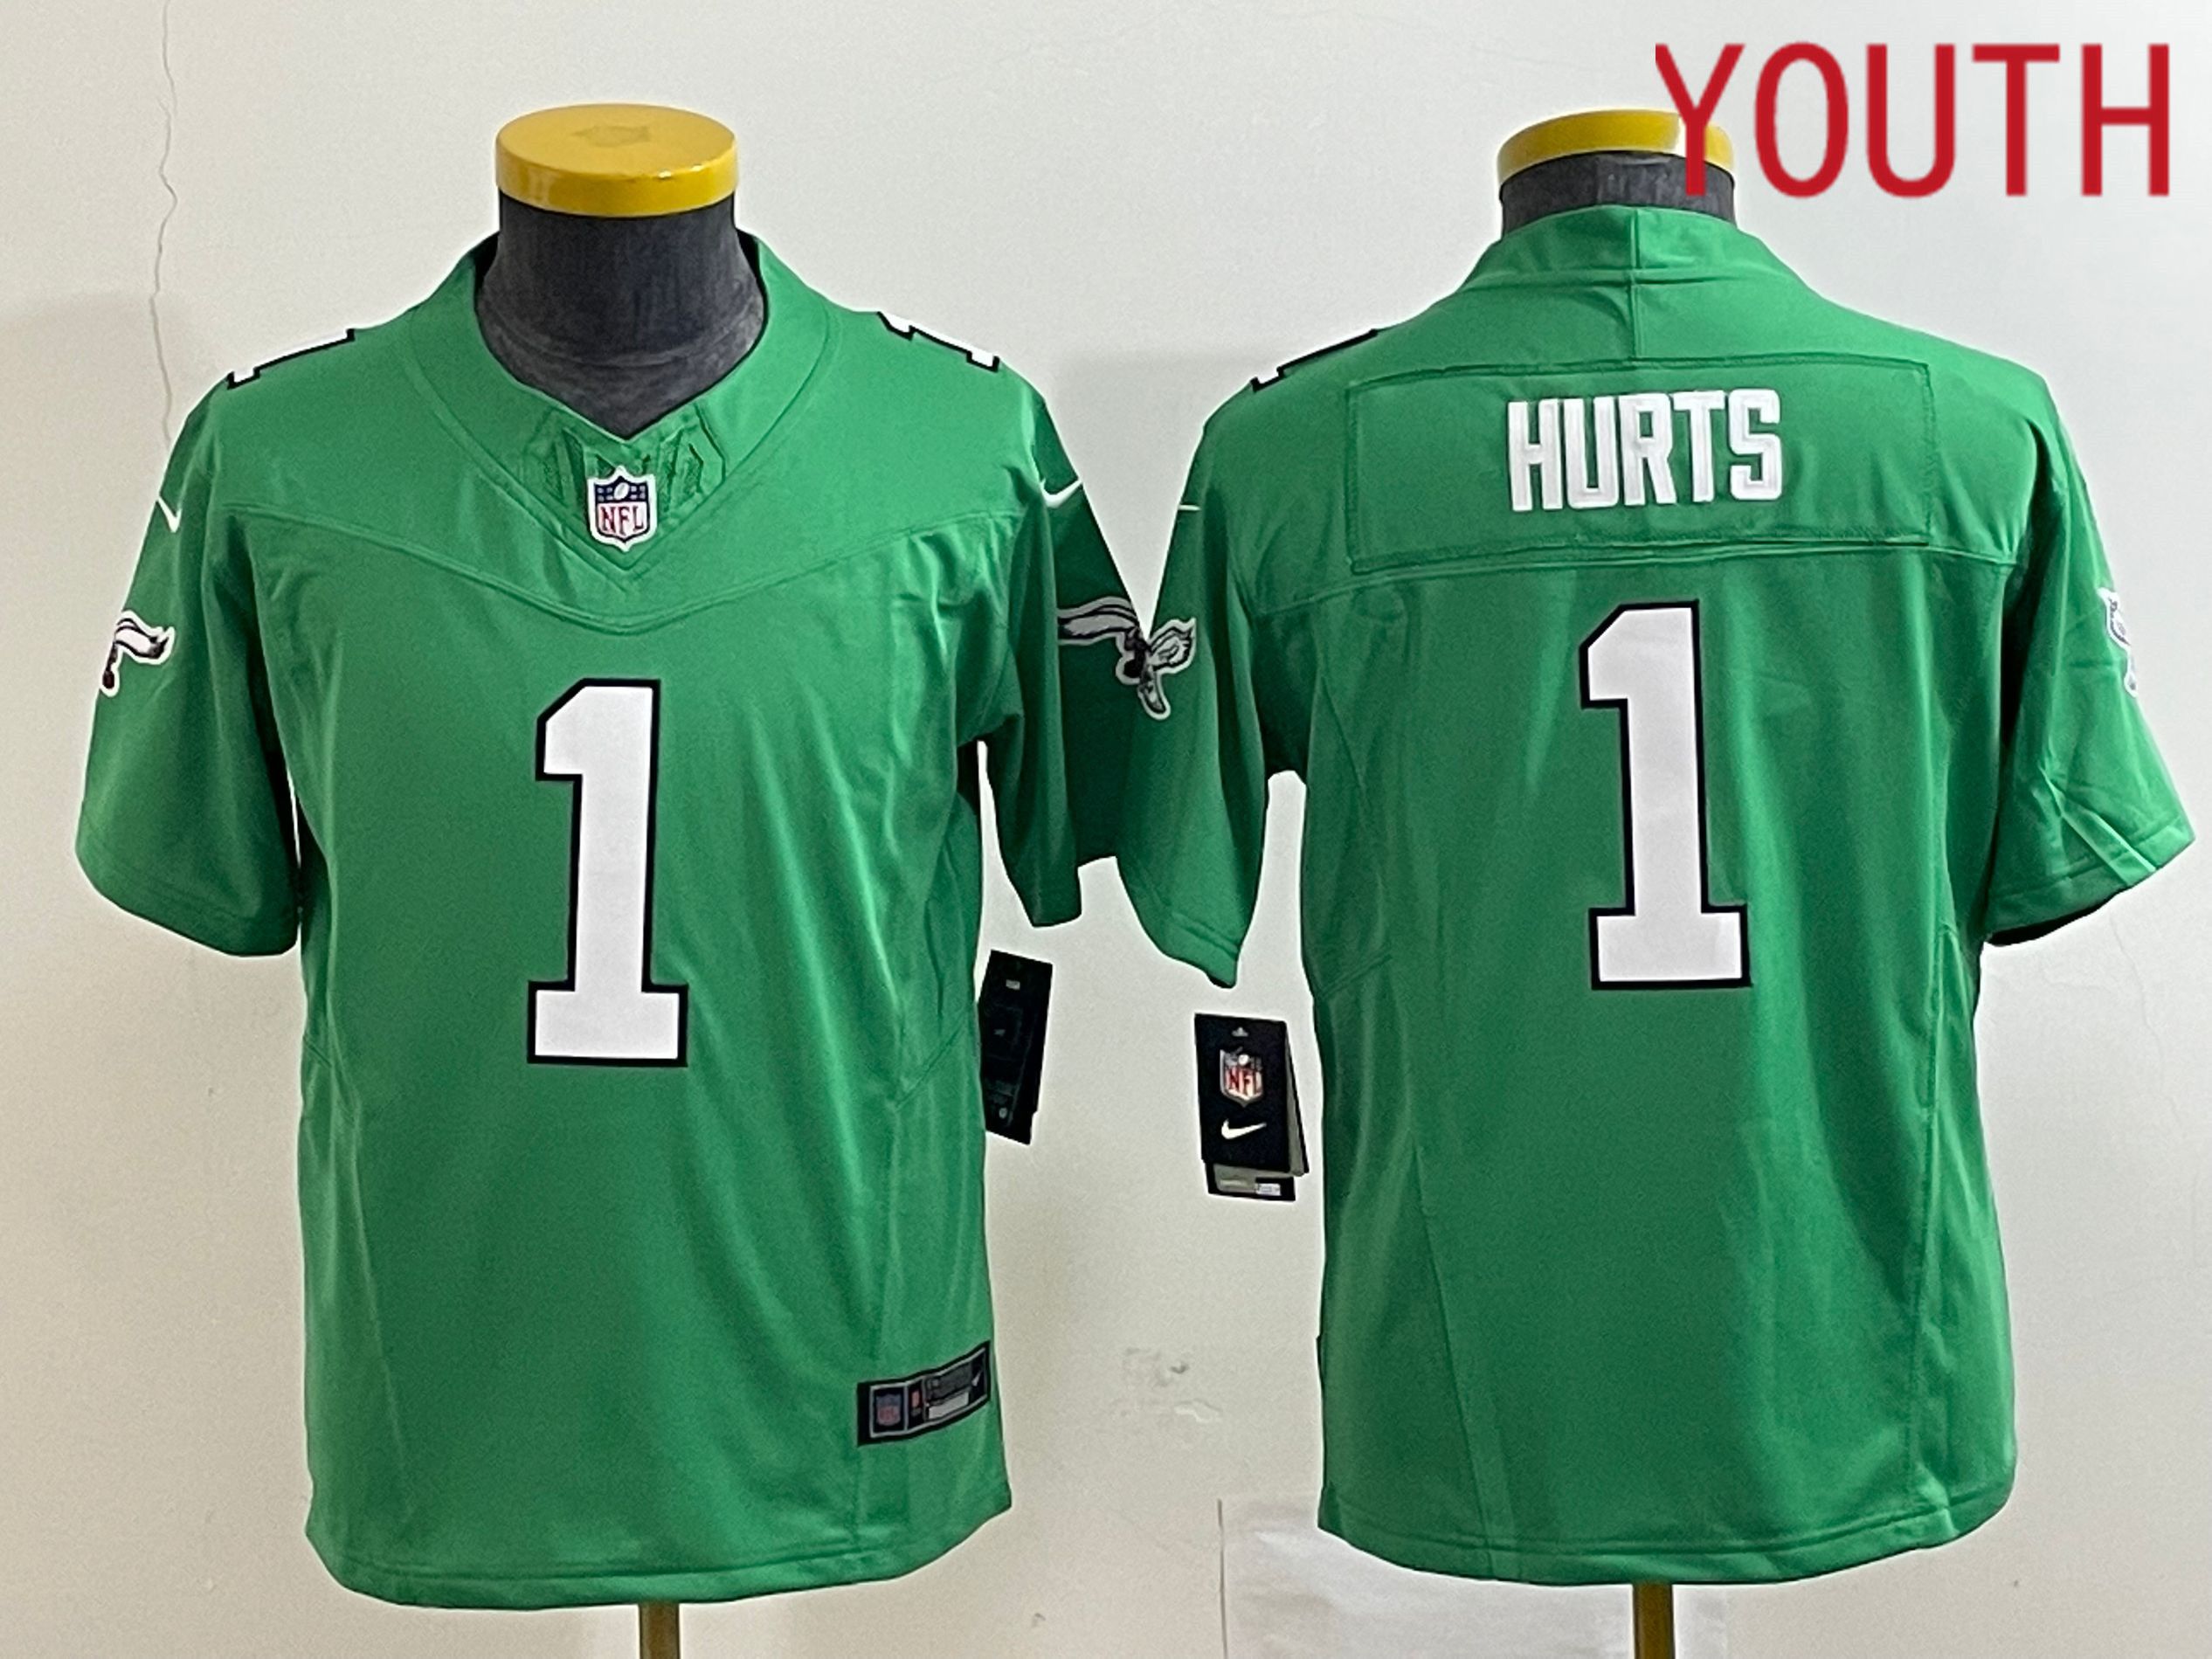 Youth Philadelphia Eagles #1 Hurts Green Nike Throwback Vapor Limited NFL Jersey->youth nfl jersey->Youth Jersey